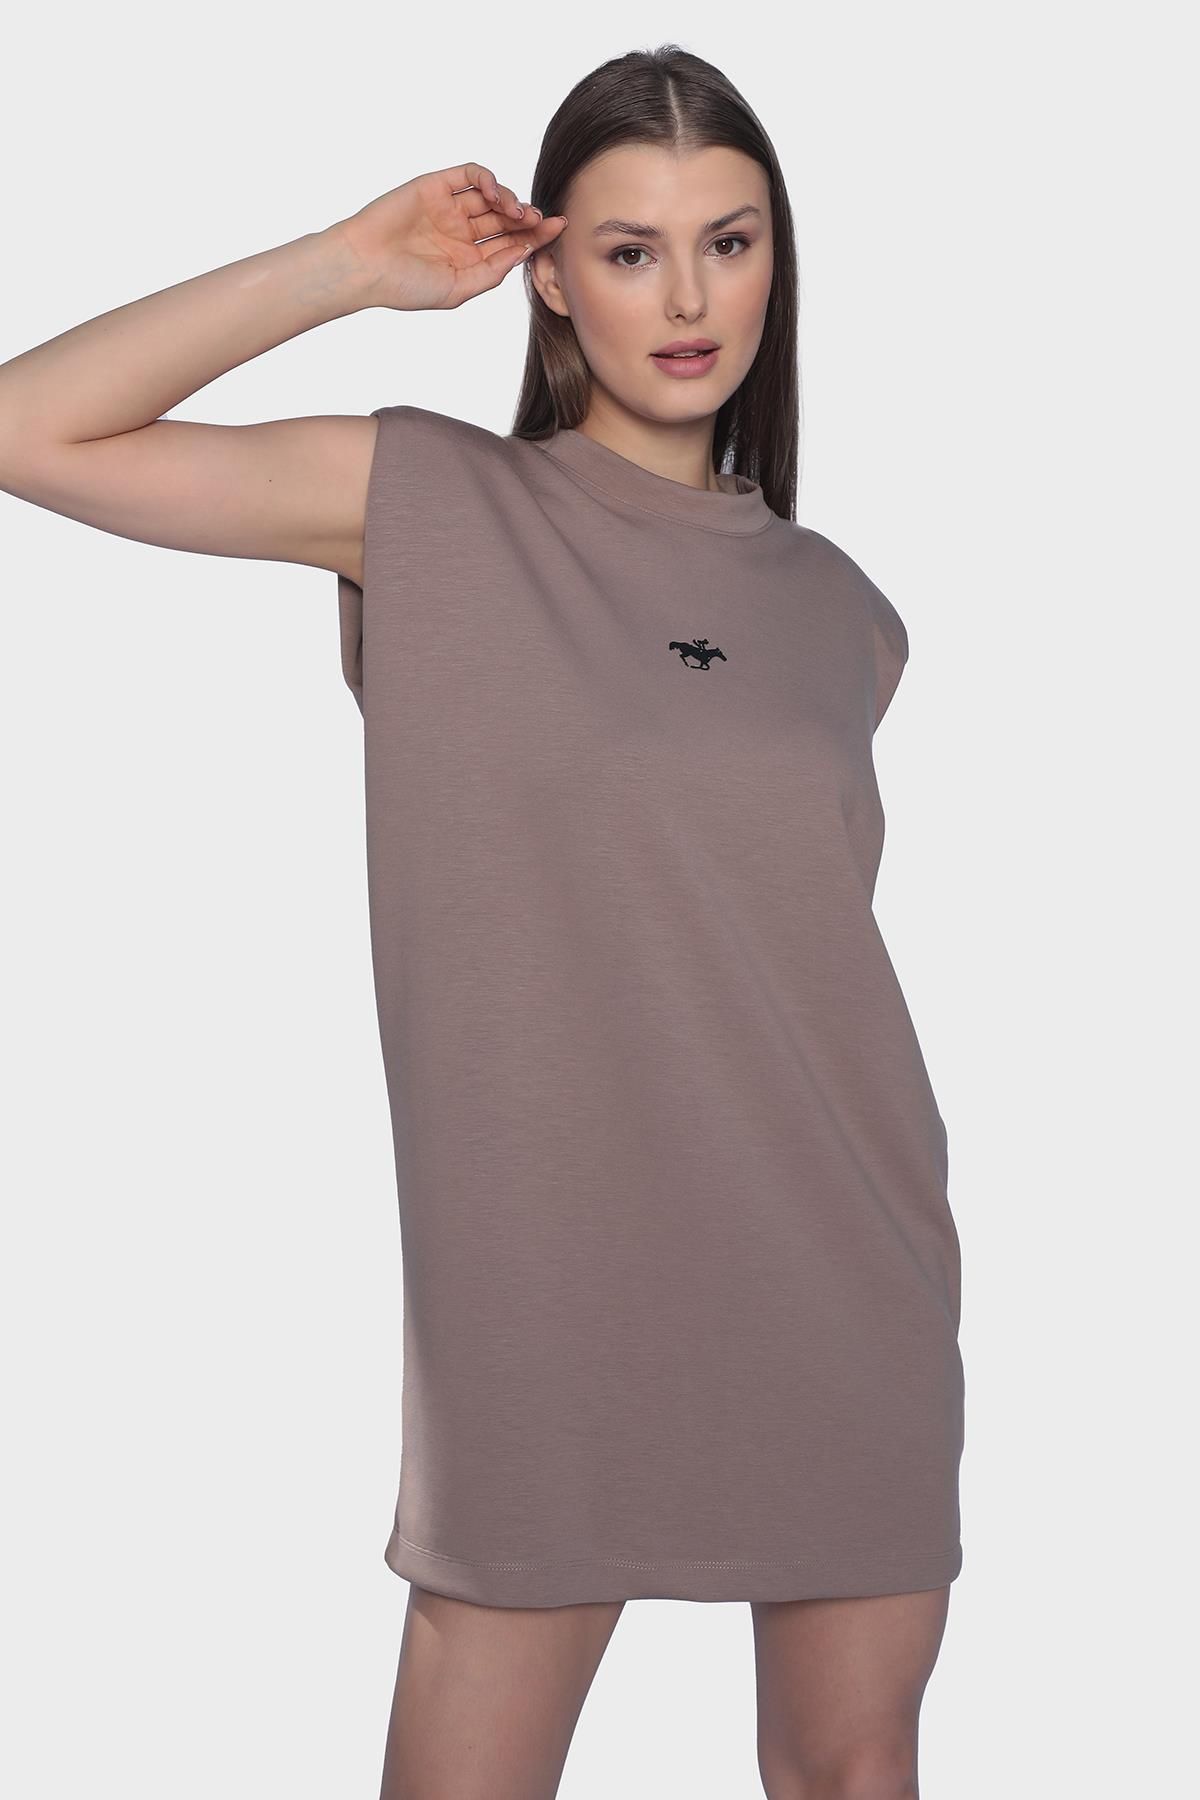 Sleeveless mini dress with oversized round neck and shoulder support - Mink